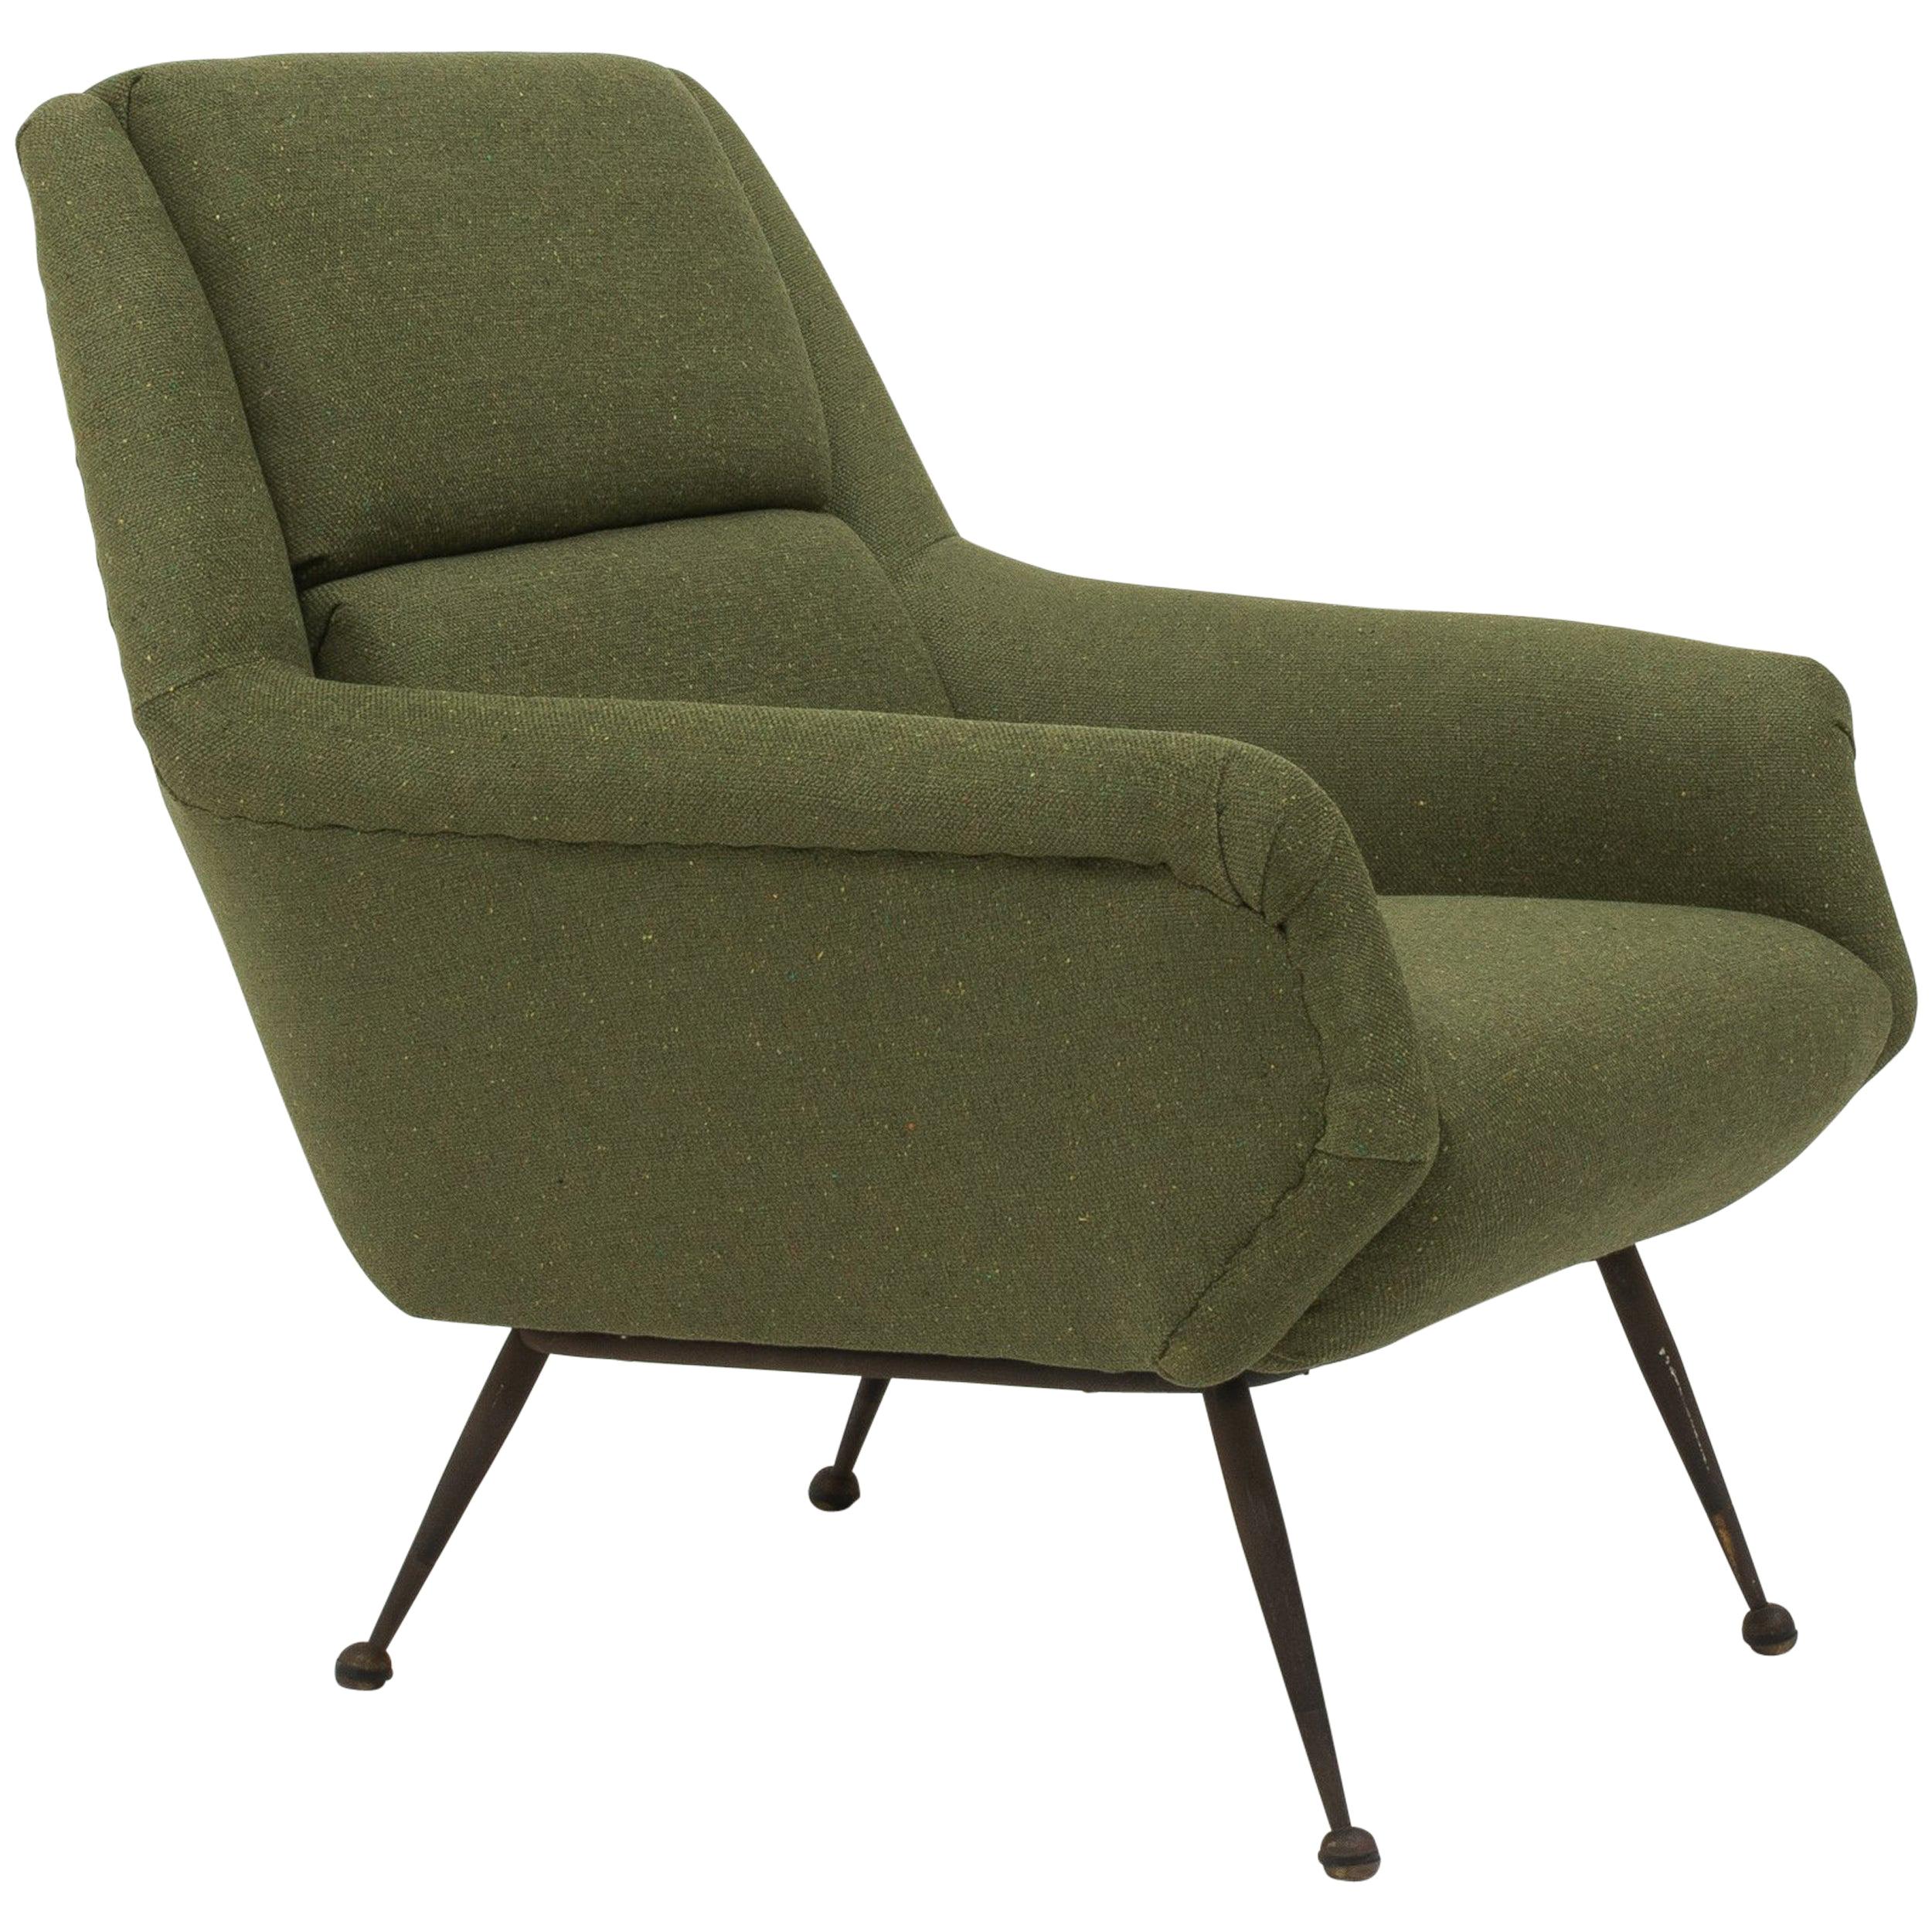 Midcentury Lounge Chair by Gio Ponti for Minotti in Green Fabric